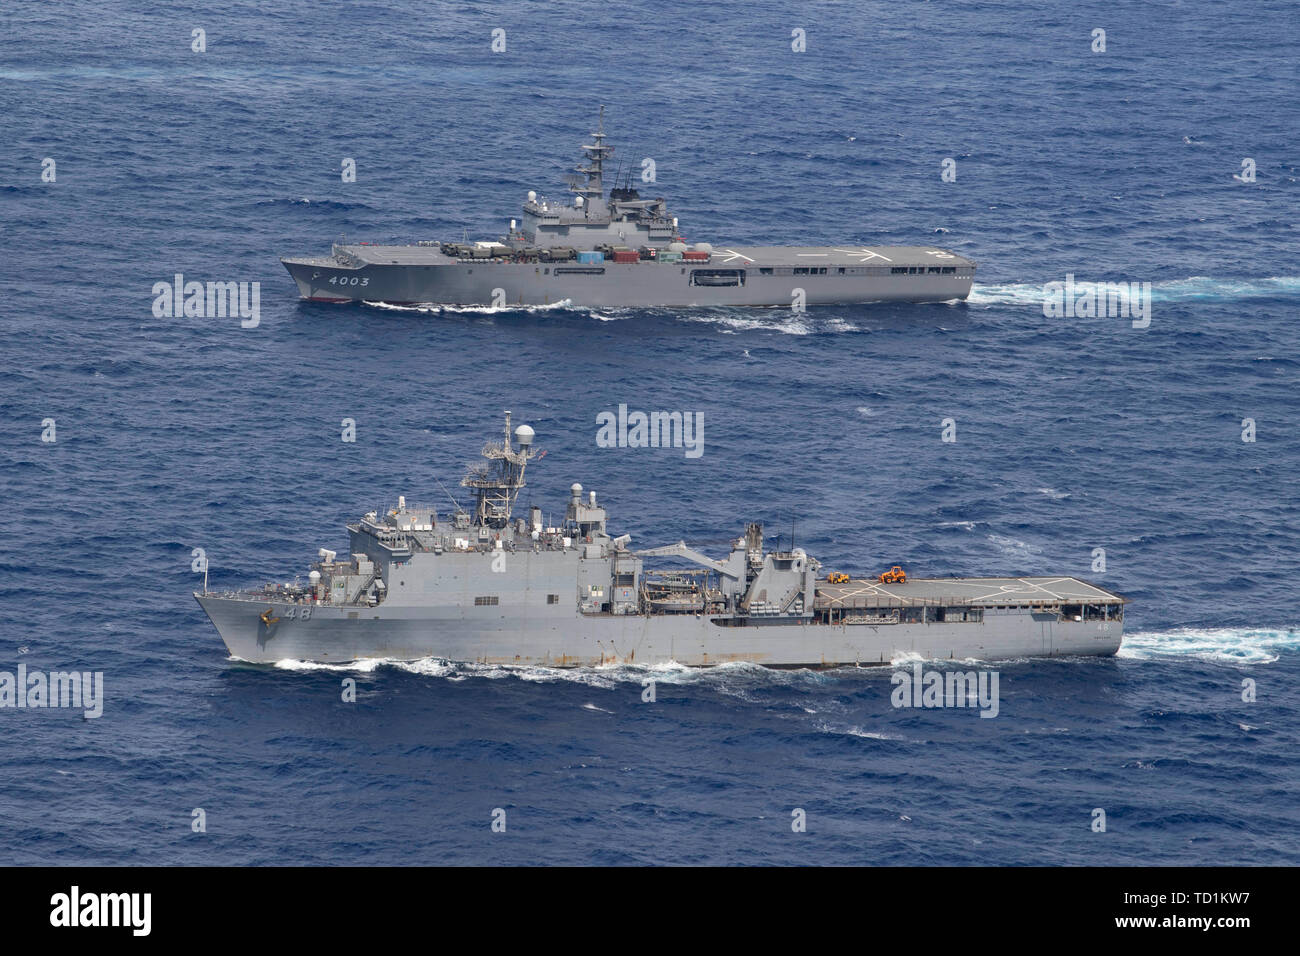 190608-N-BK435-0835 PHILIPPINE SEA (June 8, 2019) – The Whidbey Island-Class dock landing ship USS Ashland (LSD 48) takes part in a photo exercise (PHOTOEX) with Japanese Ousumi-Class tank landing ship JS Kunisaki (LST 4003) during a bilateral transit.  The Wasp Amphibious Ready Group is transiting with JS Ise and JS Kunisaki in the U.S. 7th Fleet area of operations. (U.S. Navy photo by Mass Communication Specialist 1st Class Jeremy Starr) Stock Photo